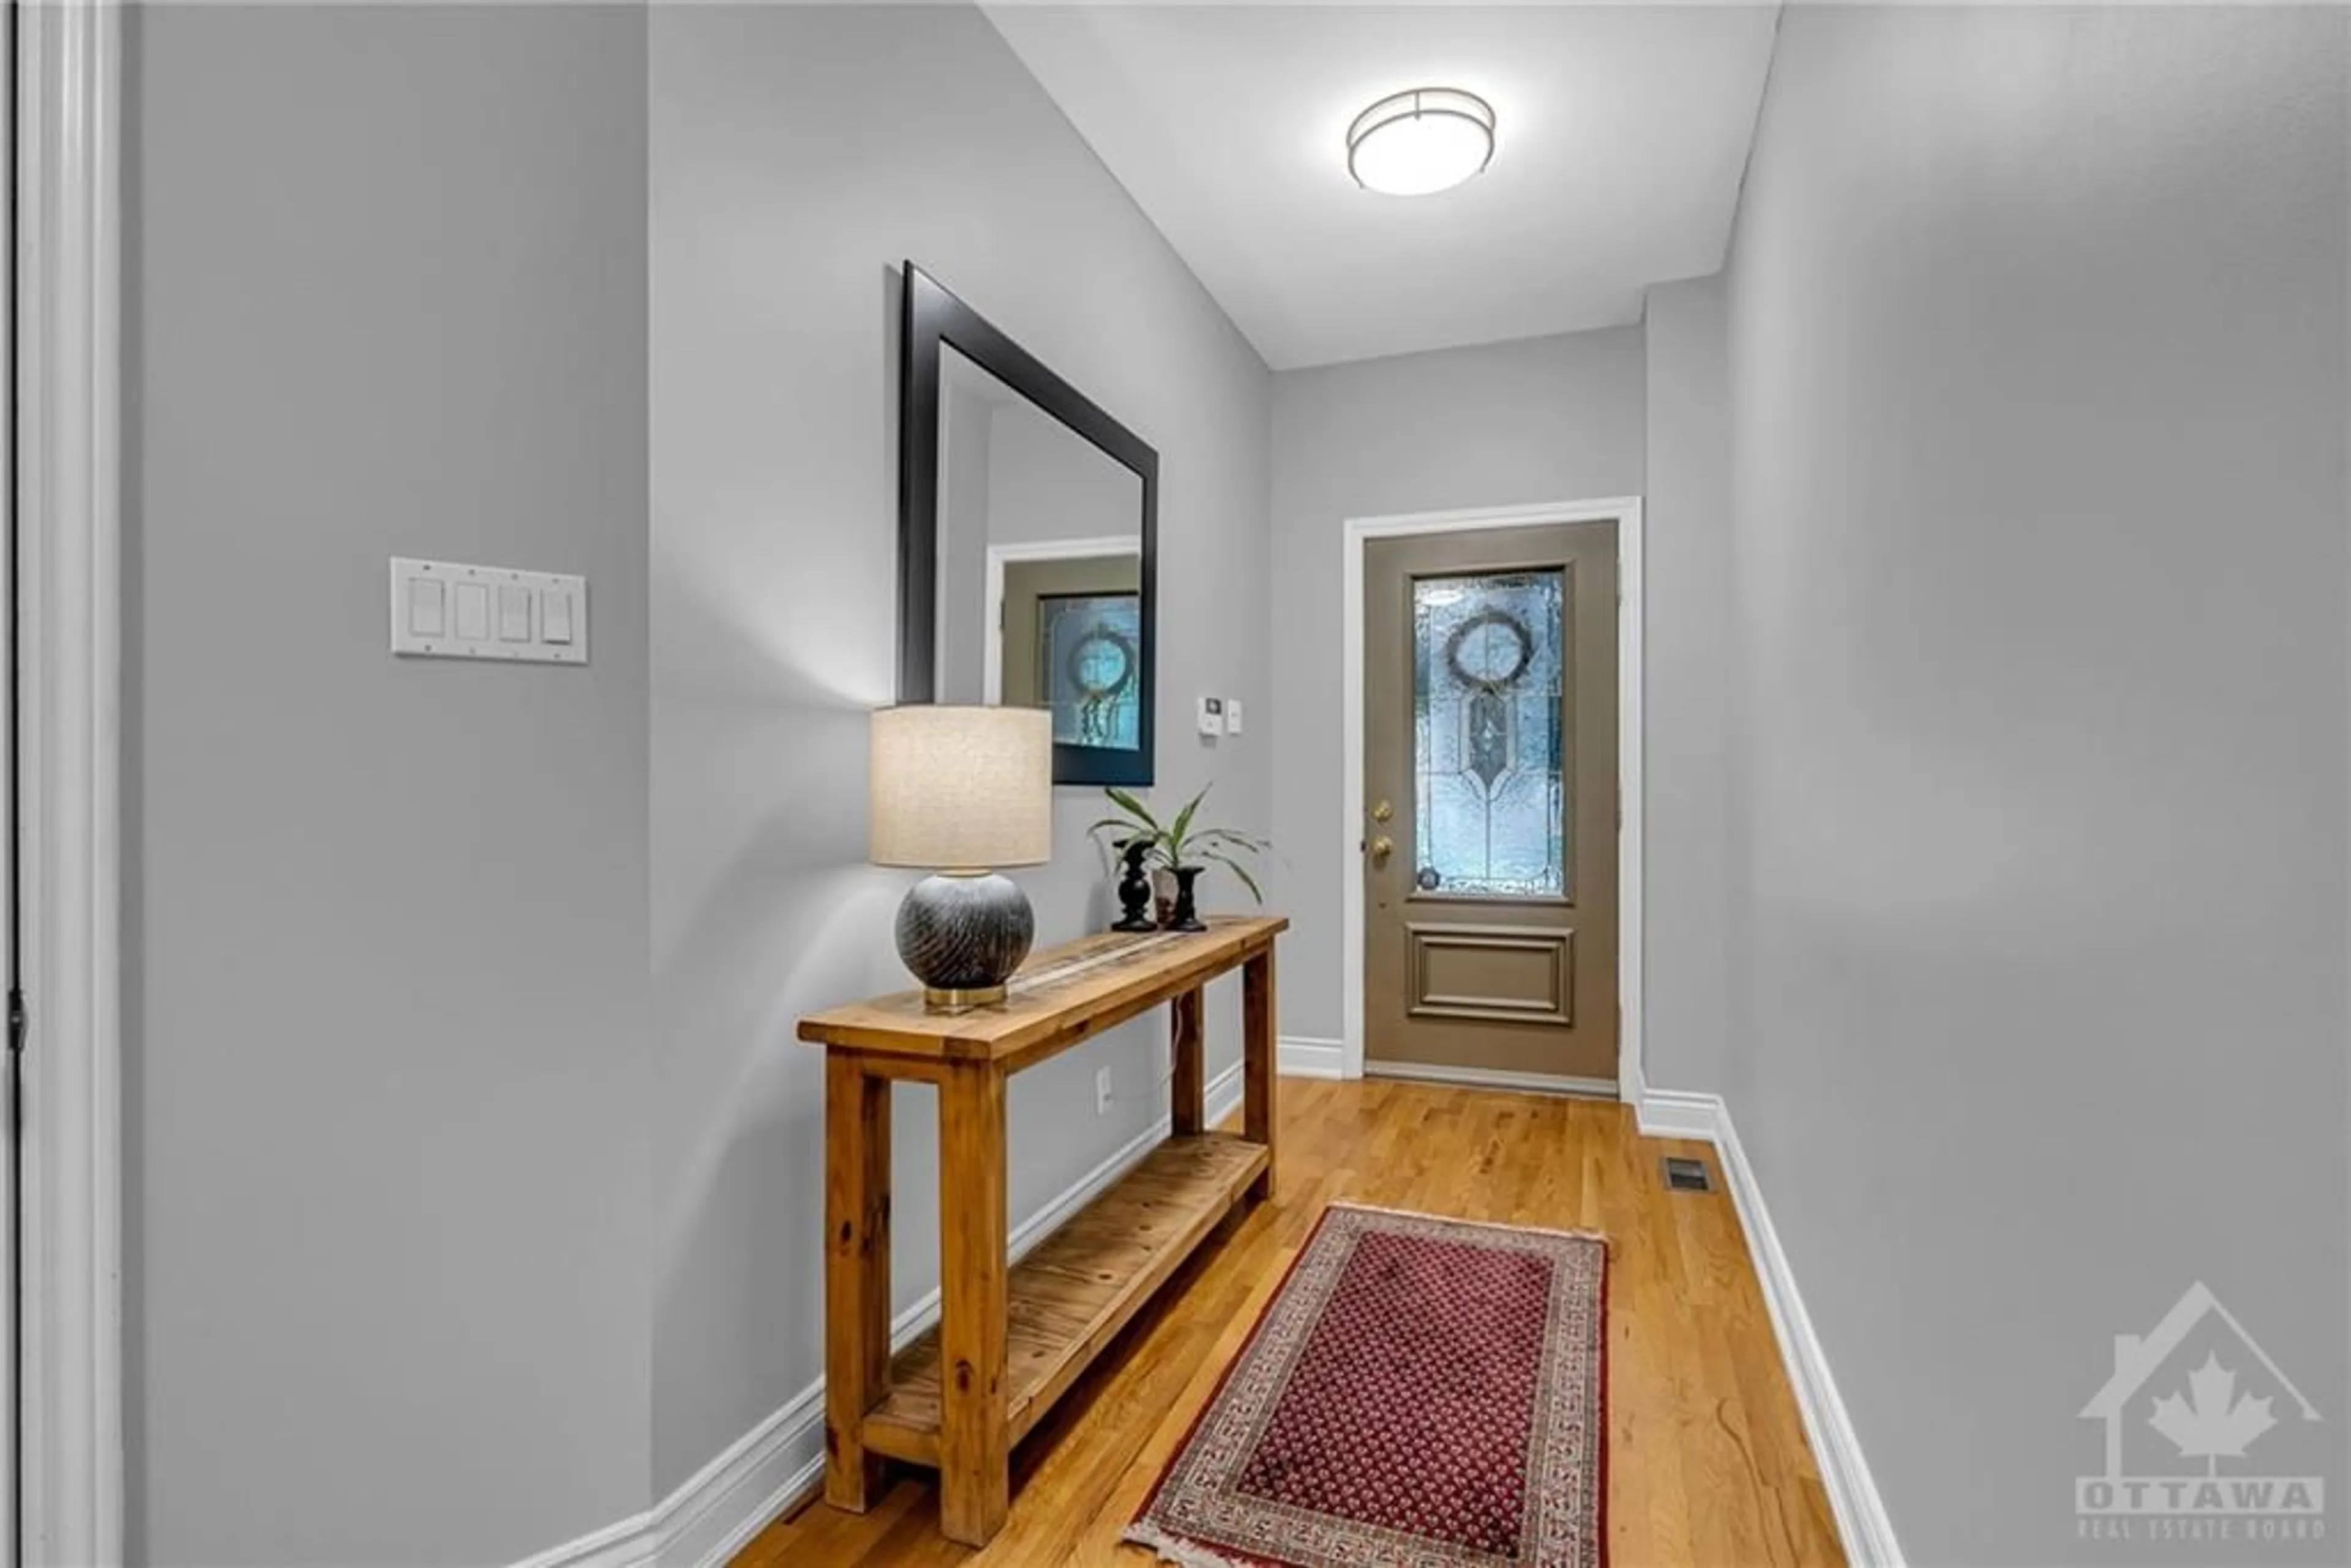 Indoor entryway for 125 SECOND Ave #B, Ottawa Ontario K1S 2H4